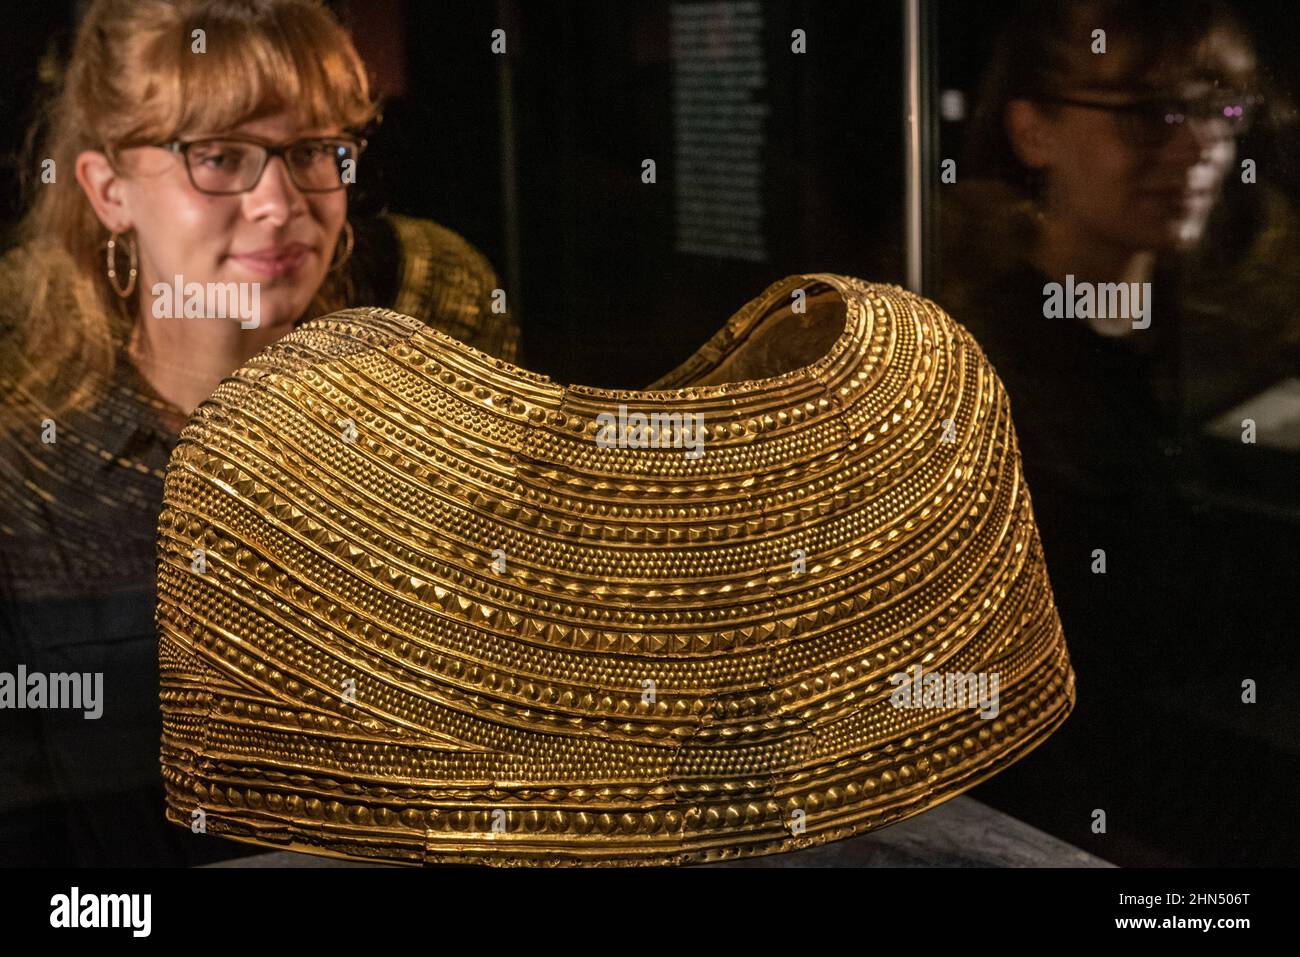 London, UK.  14 February 2022. A staff member poses with a gold cape from Mold in Wales, about 1900-1600 BC. Preview of “The world of Stonehenge” at the British Museum”, the UK’s first ever major exhibition on Stonehenge which features over 430 objects on show from Britain, Ireland and Europe.  The works are on display 17 February to 17 July 2022.  Credit: Stephen Chung / Alamy Live News Stock Photo